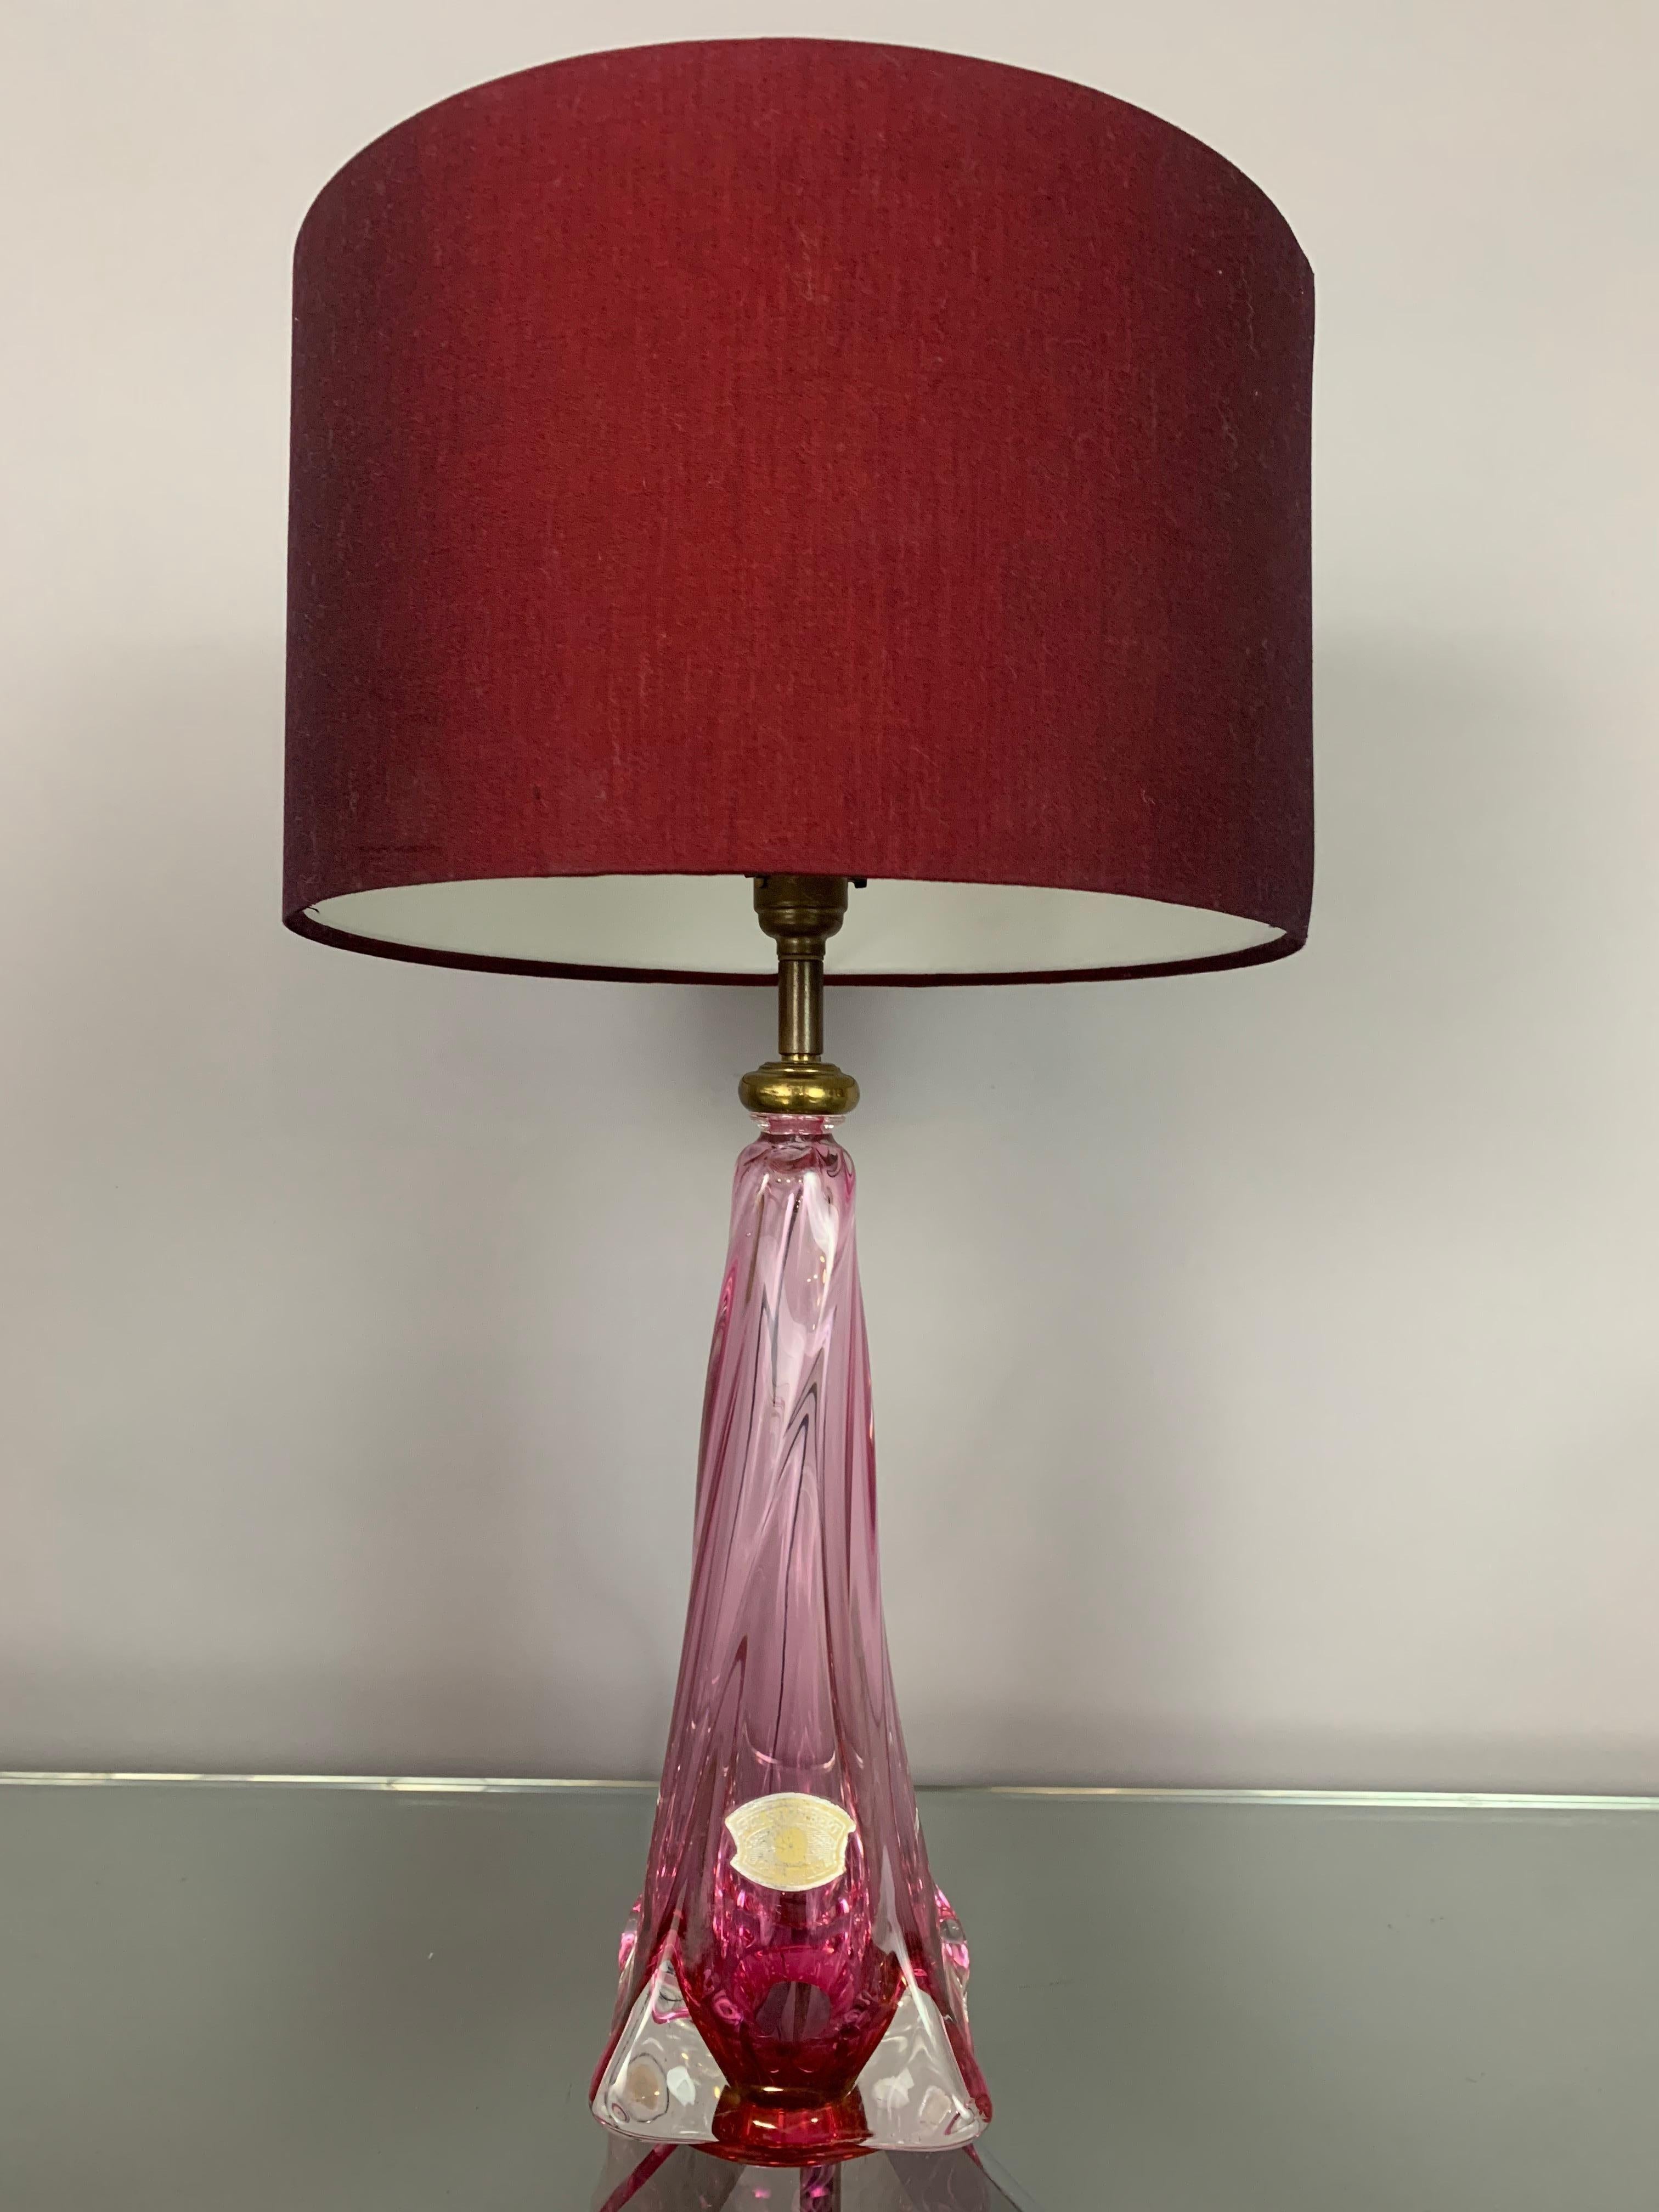 1950s Belgium Val St. Lambert, hand blown, pink and clear crystal glass, tapering, swirled, table lamp which includes a new silk shade. The lamp is a striking deep pink towards the base becoming clearer towards the top. Each corner of the square